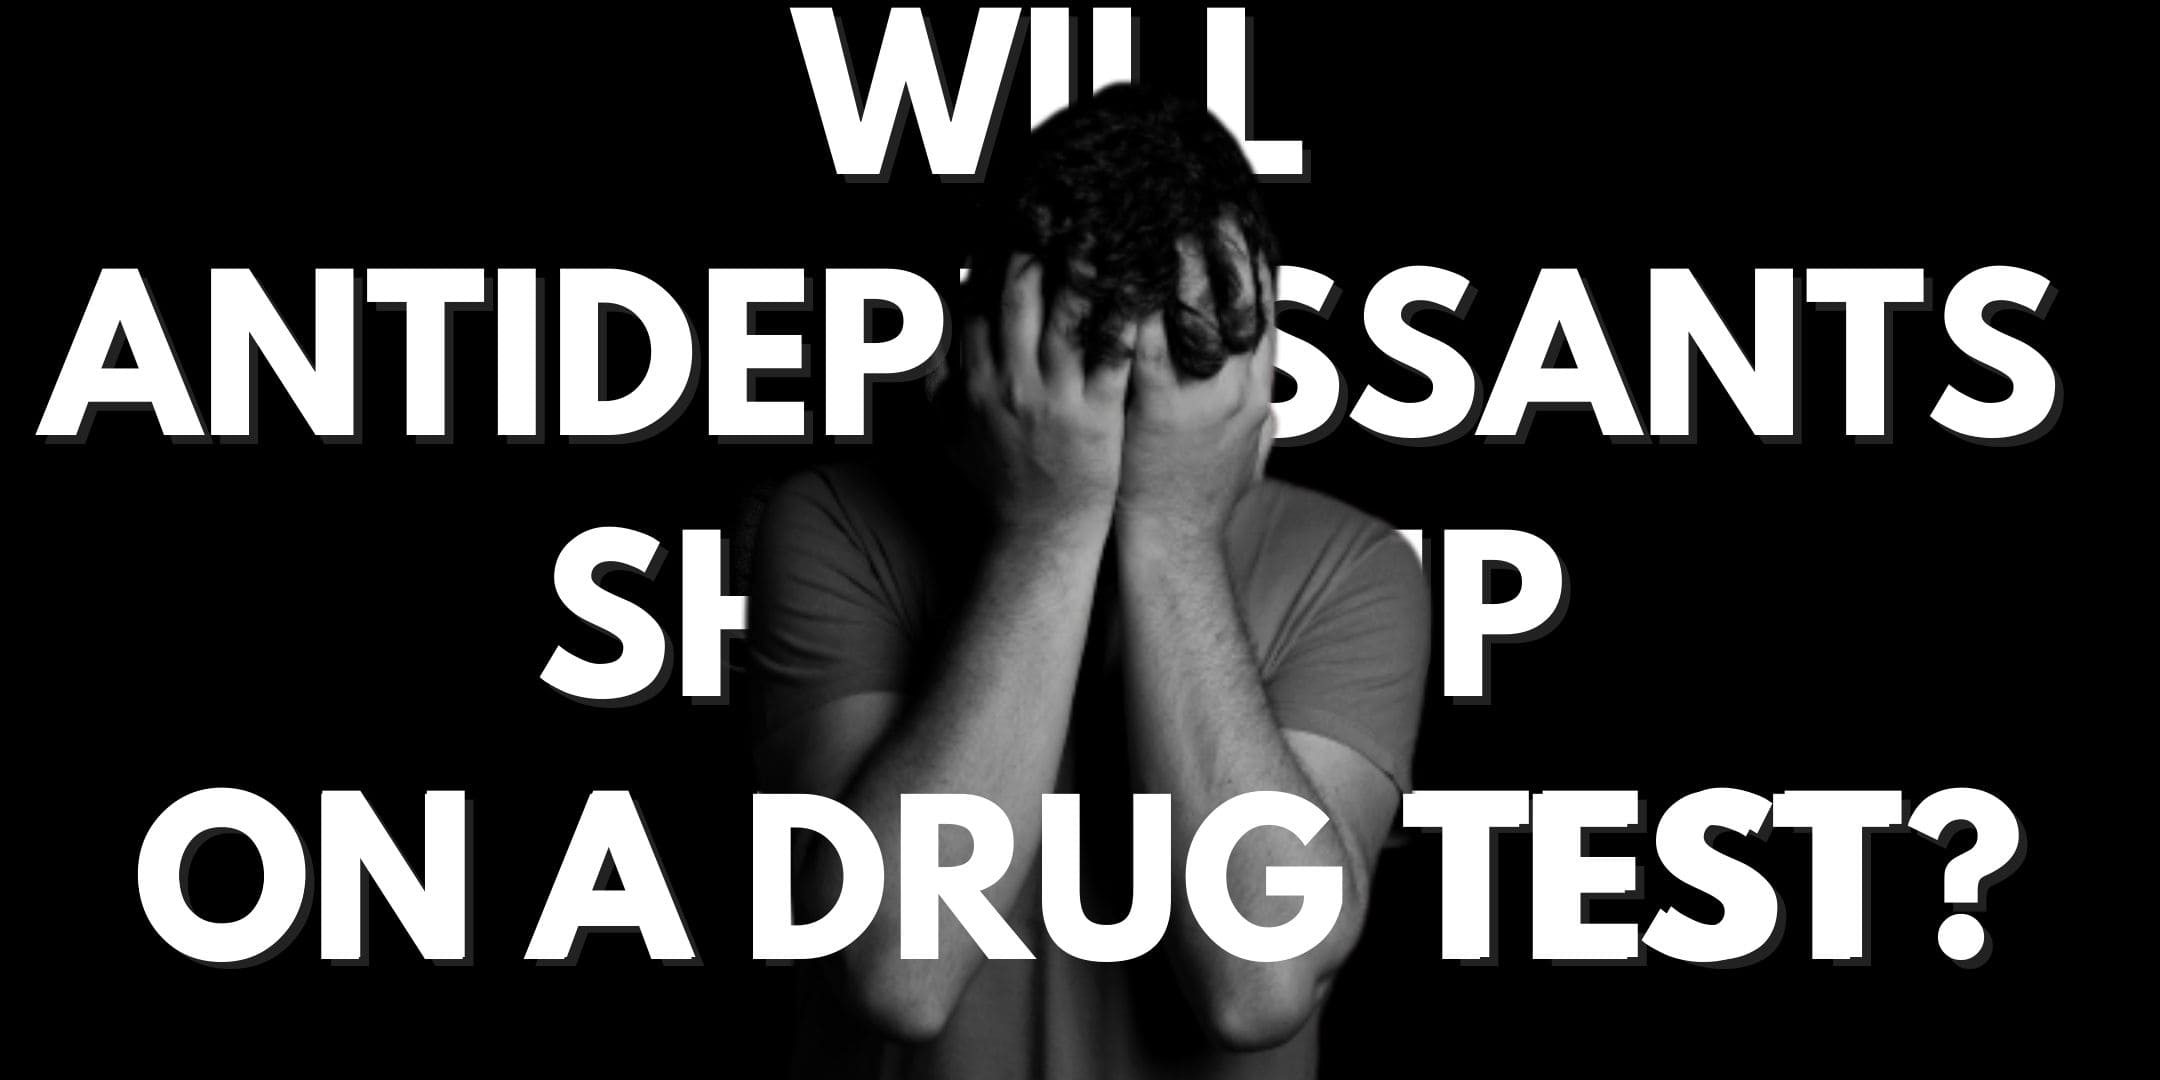 Will Antidepressants Show Up On A Drug Test?